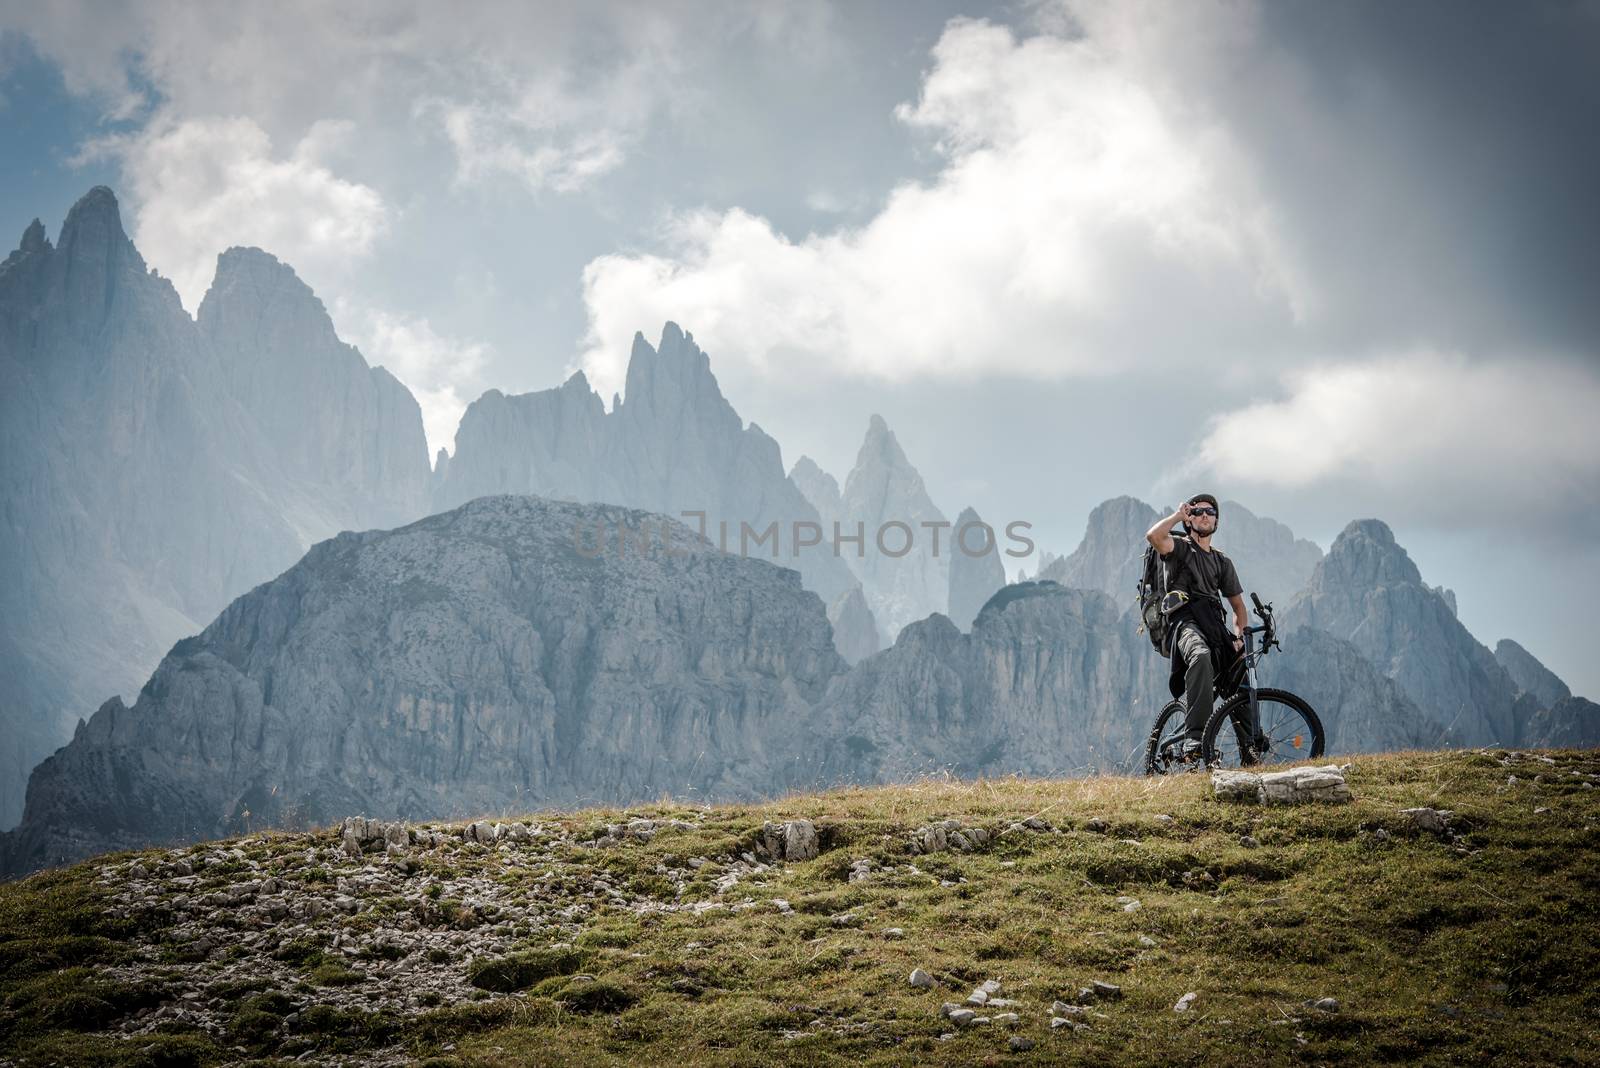 High Mountains Bike Ride. Caucasian Sportsman on the Ride Through Scenic Mountains Landscape.